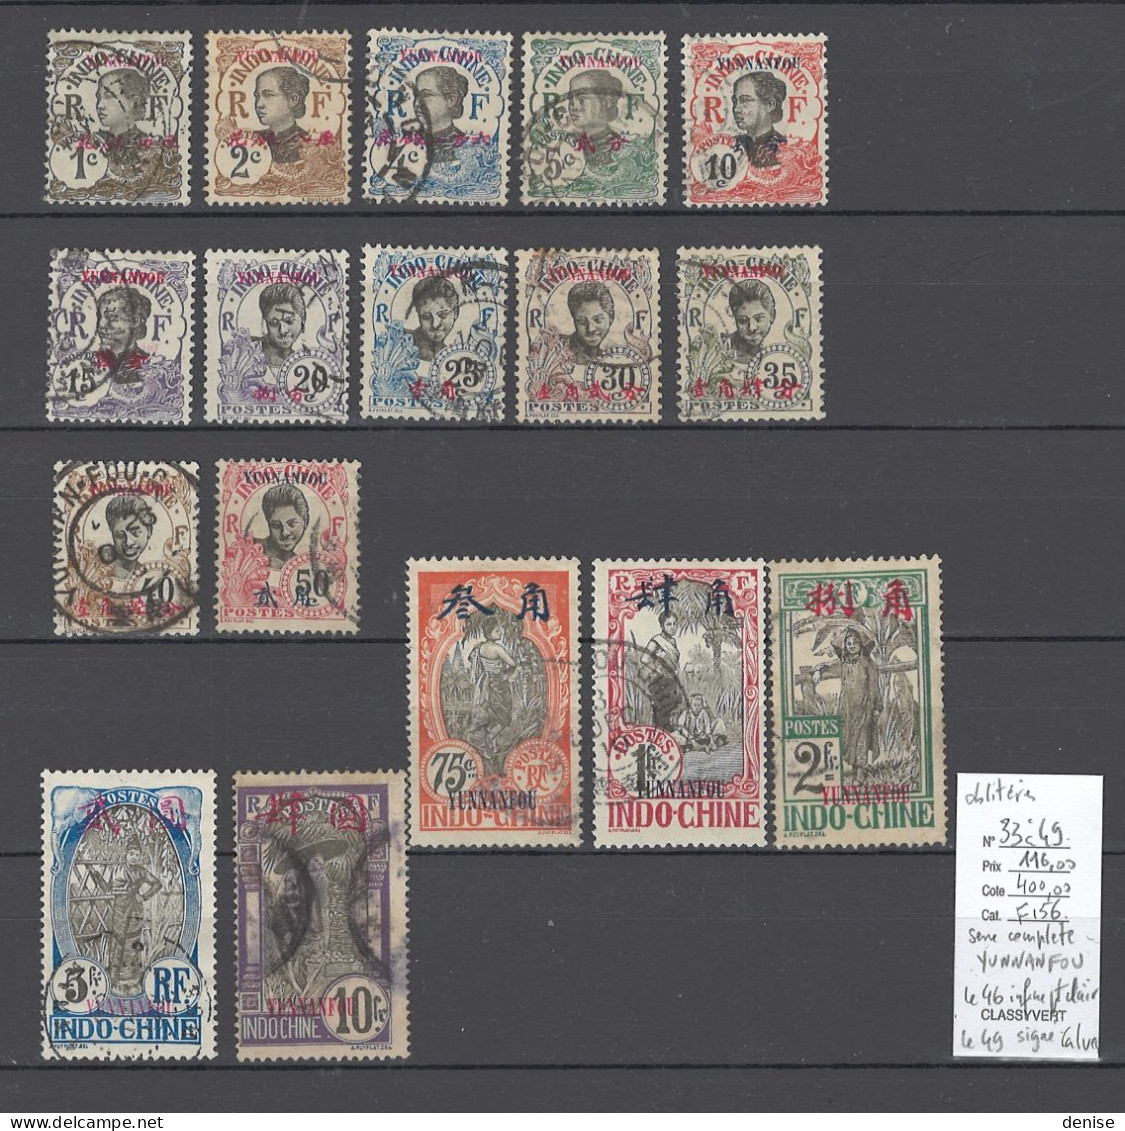 Yunnanfou - Chine Française - Yvert 33 A 49 - Oblitérés - Used Stamps